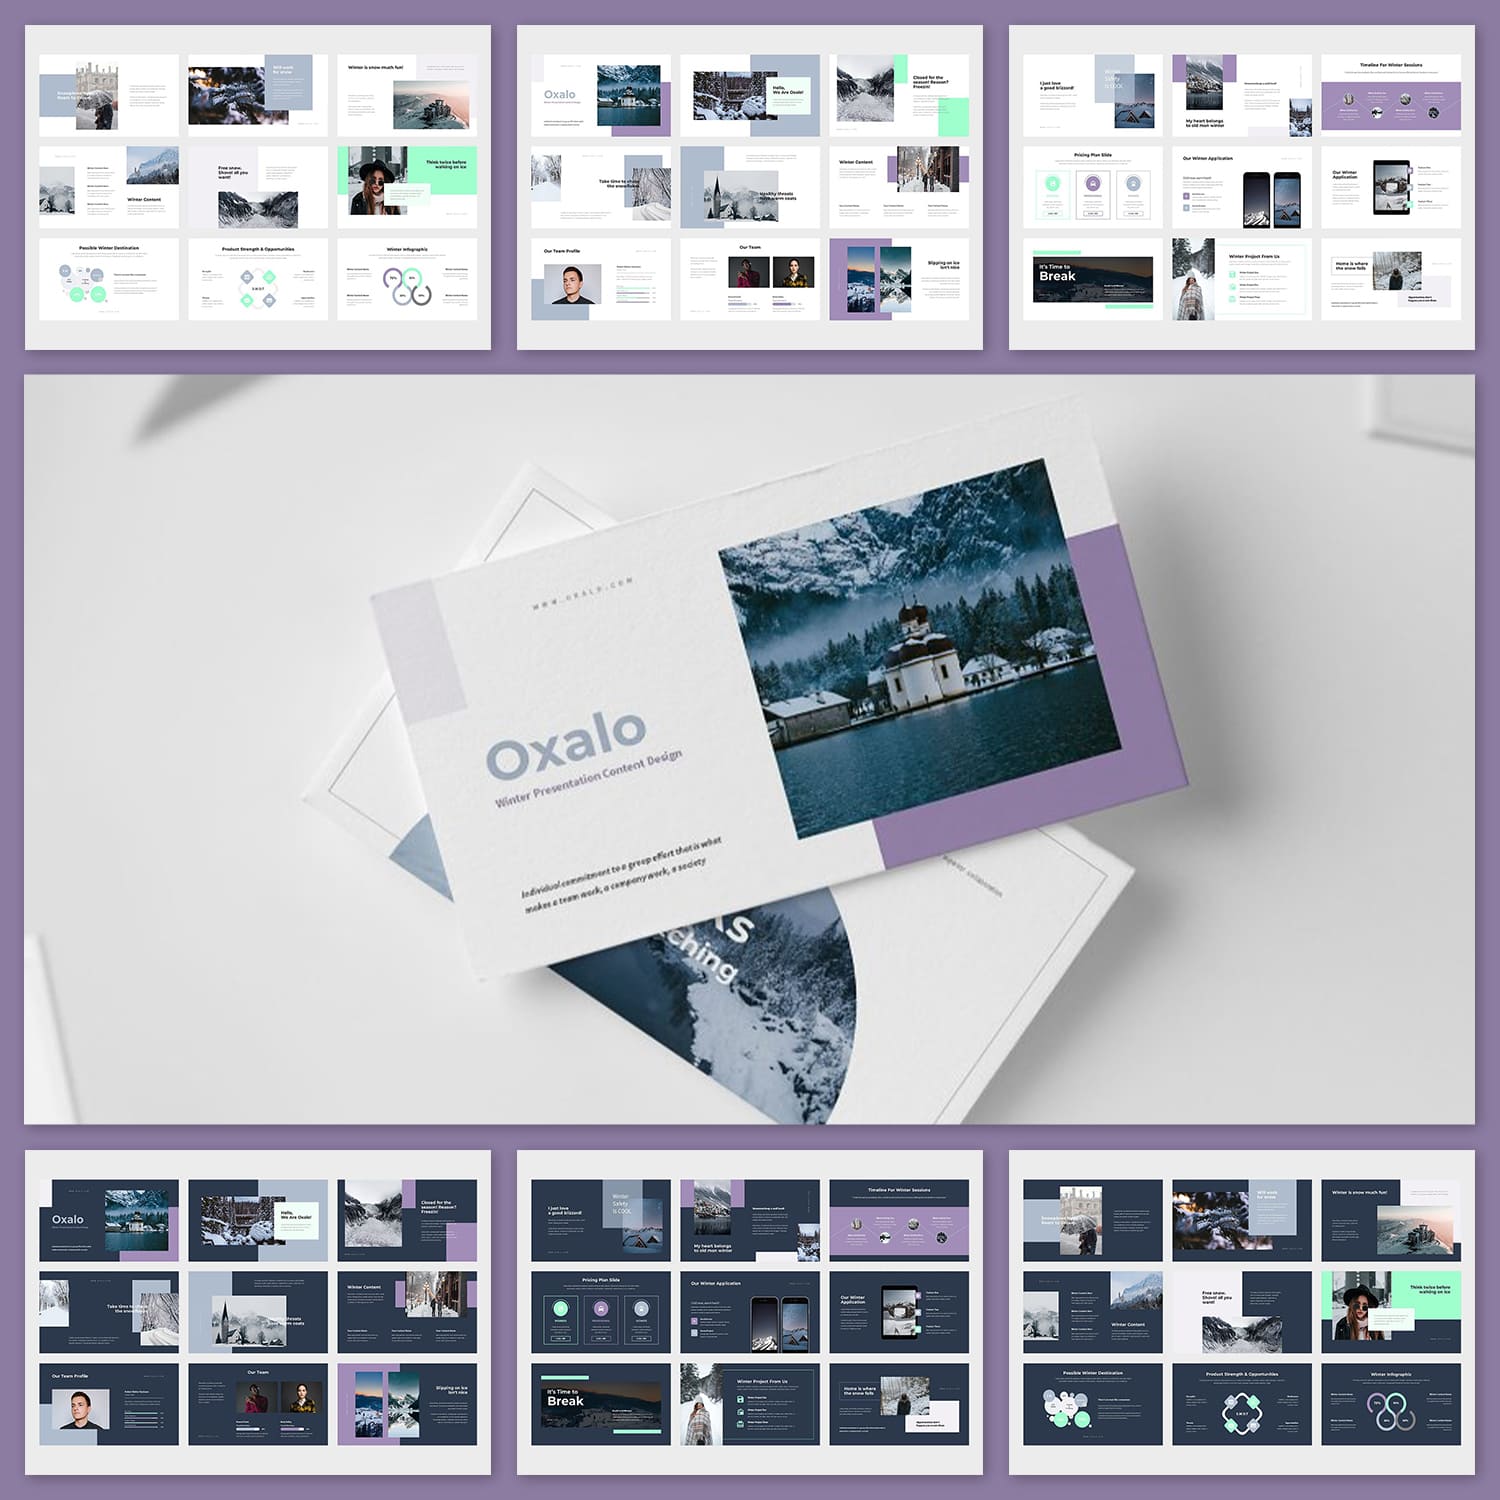 oxalo winter theme powerpoint preview image.